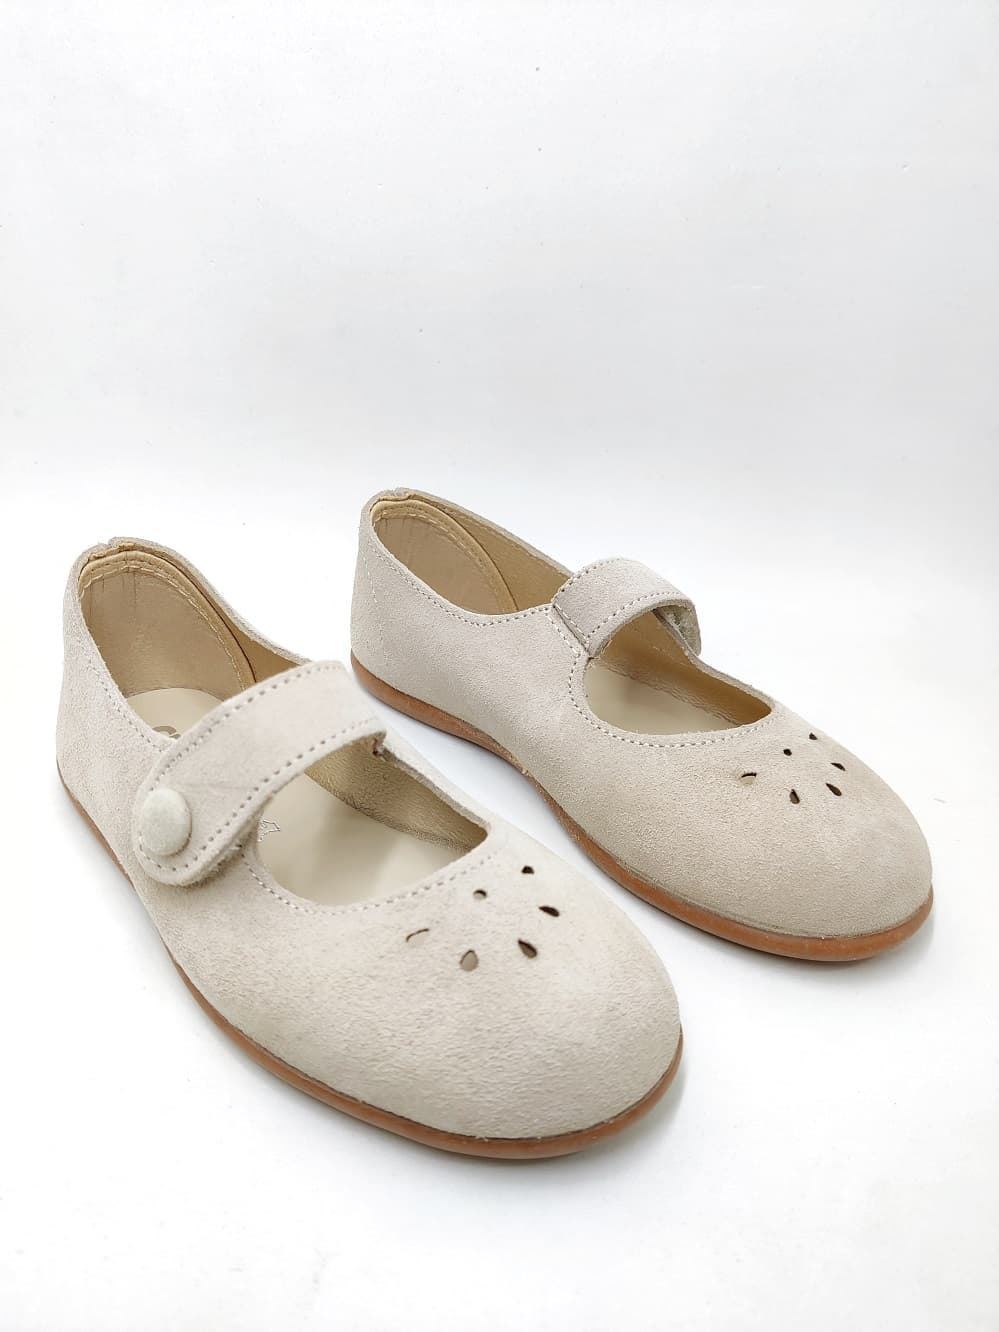 Merceditas sweets for girls in raw suede - Image 1